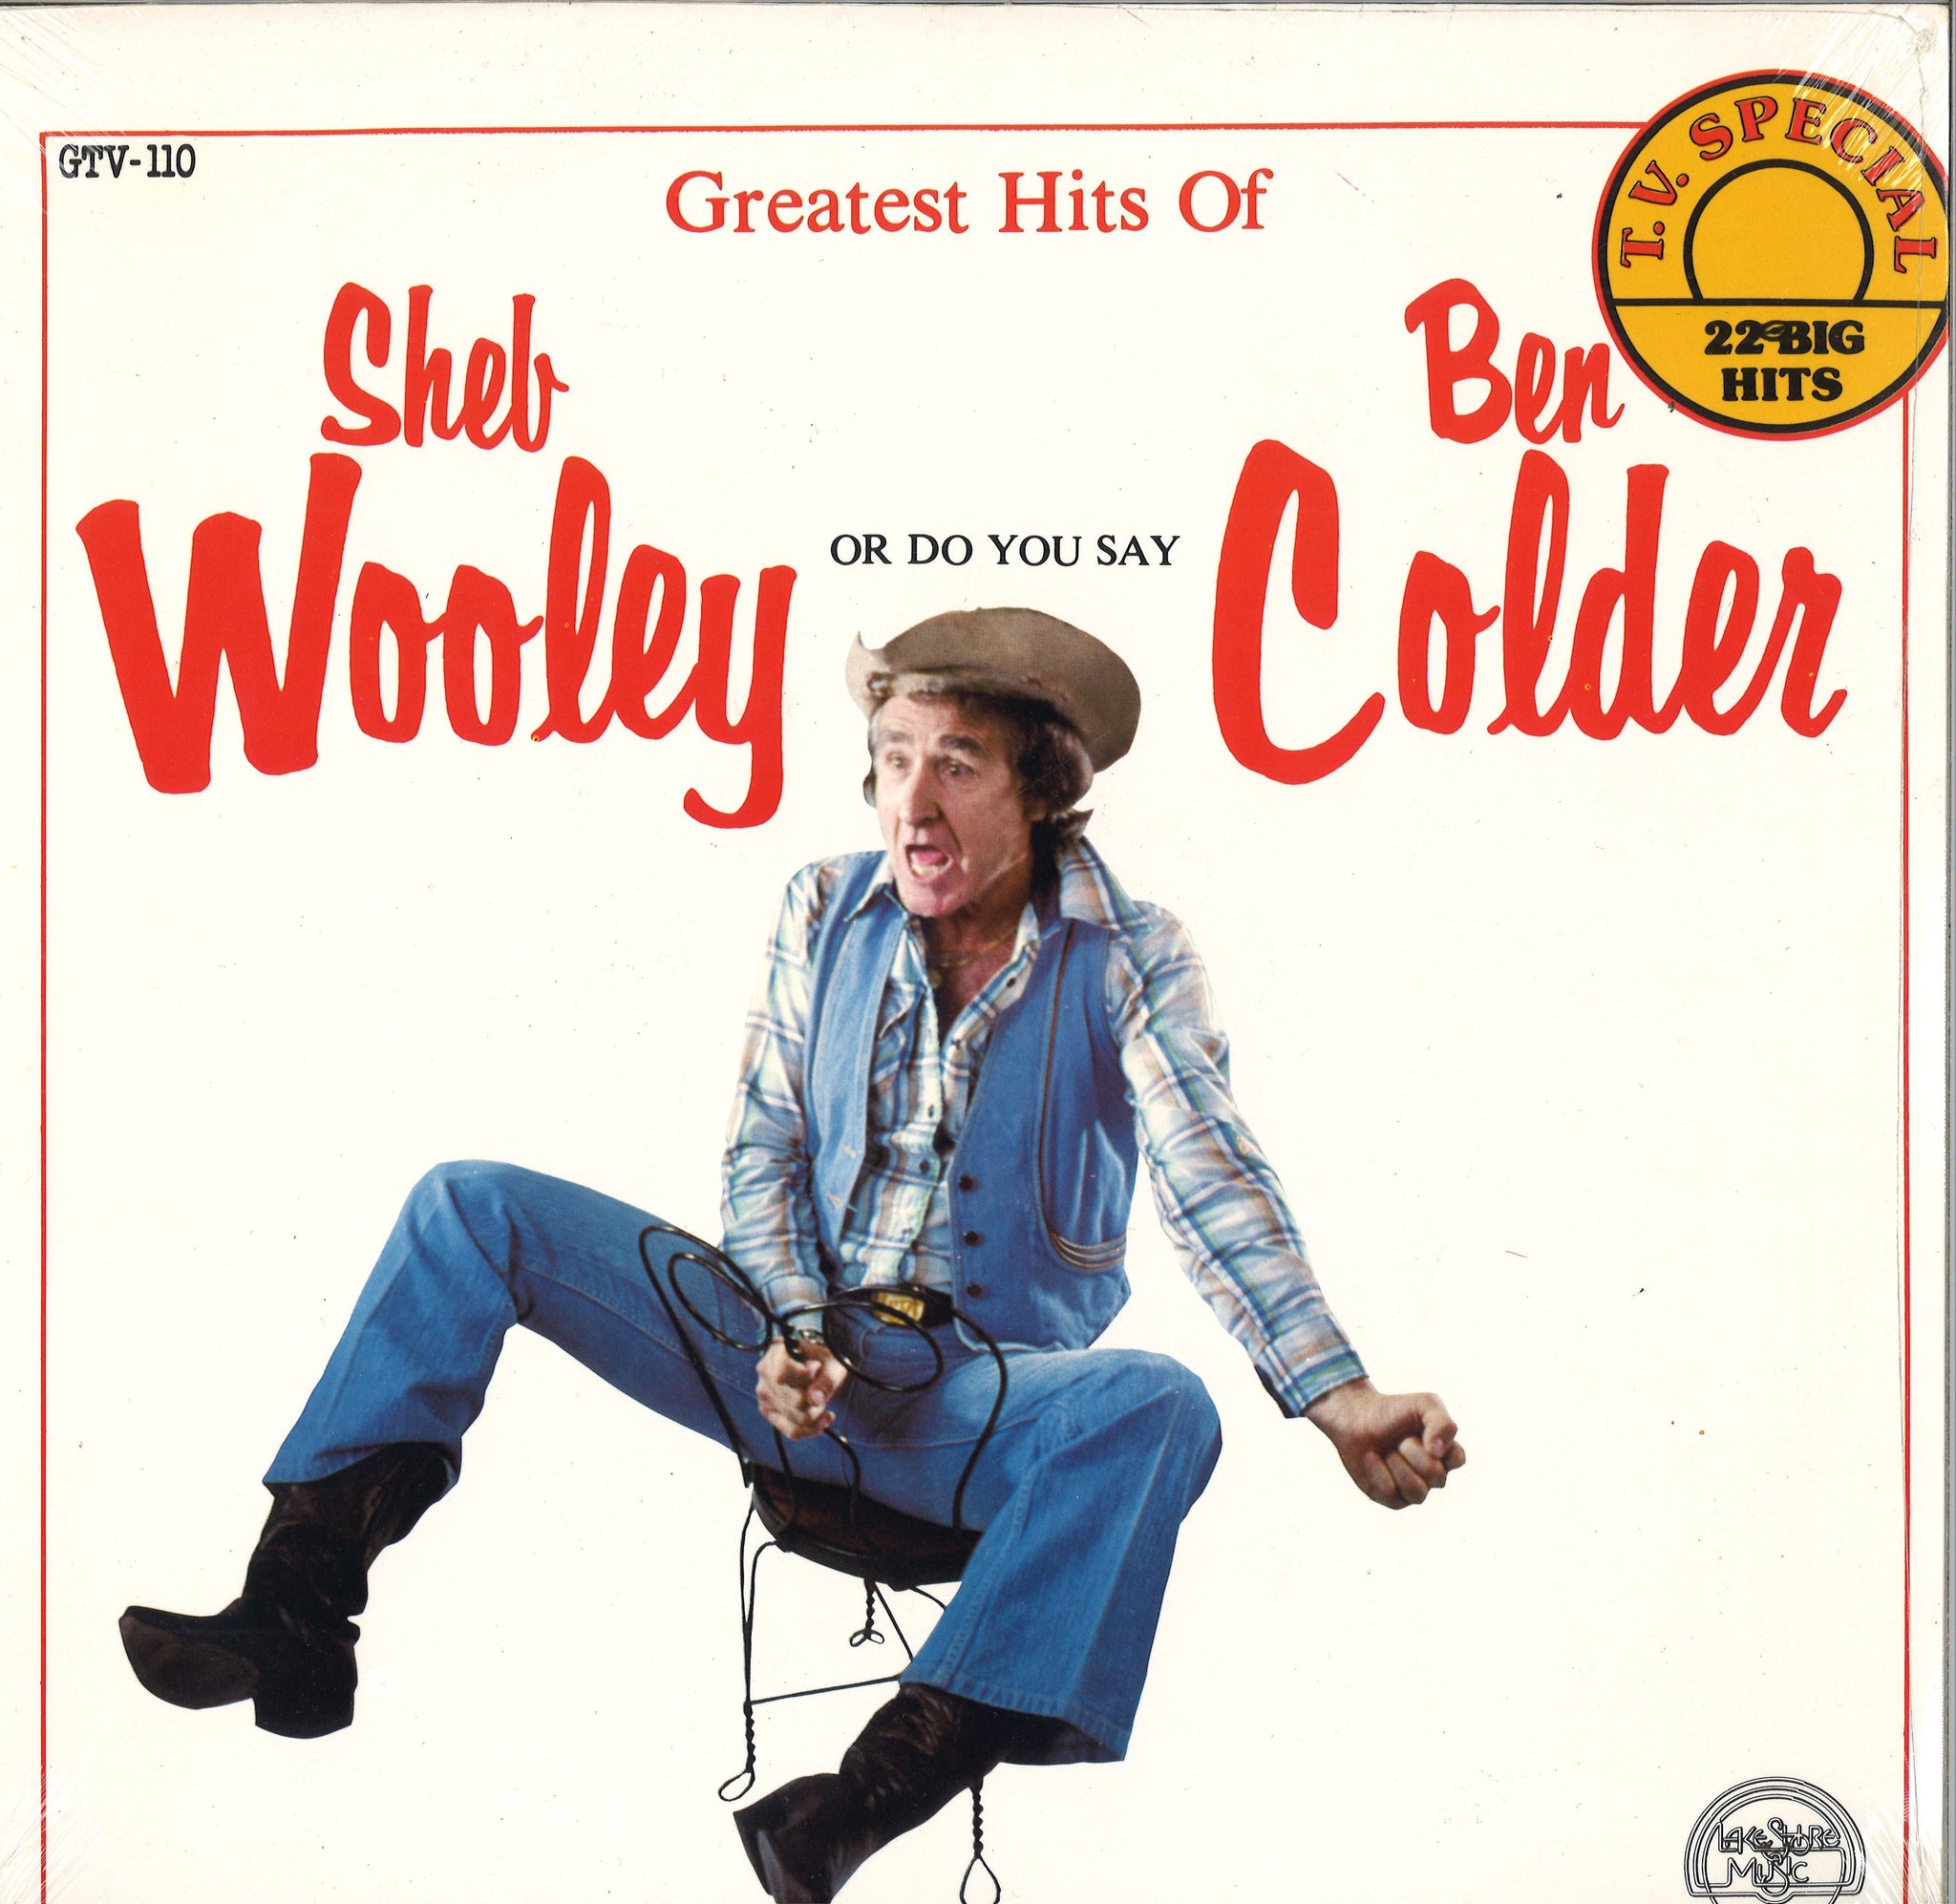 Sheb Wooley Greatest Hits Of Sheb Wooley Or Do You Say Ben Colder